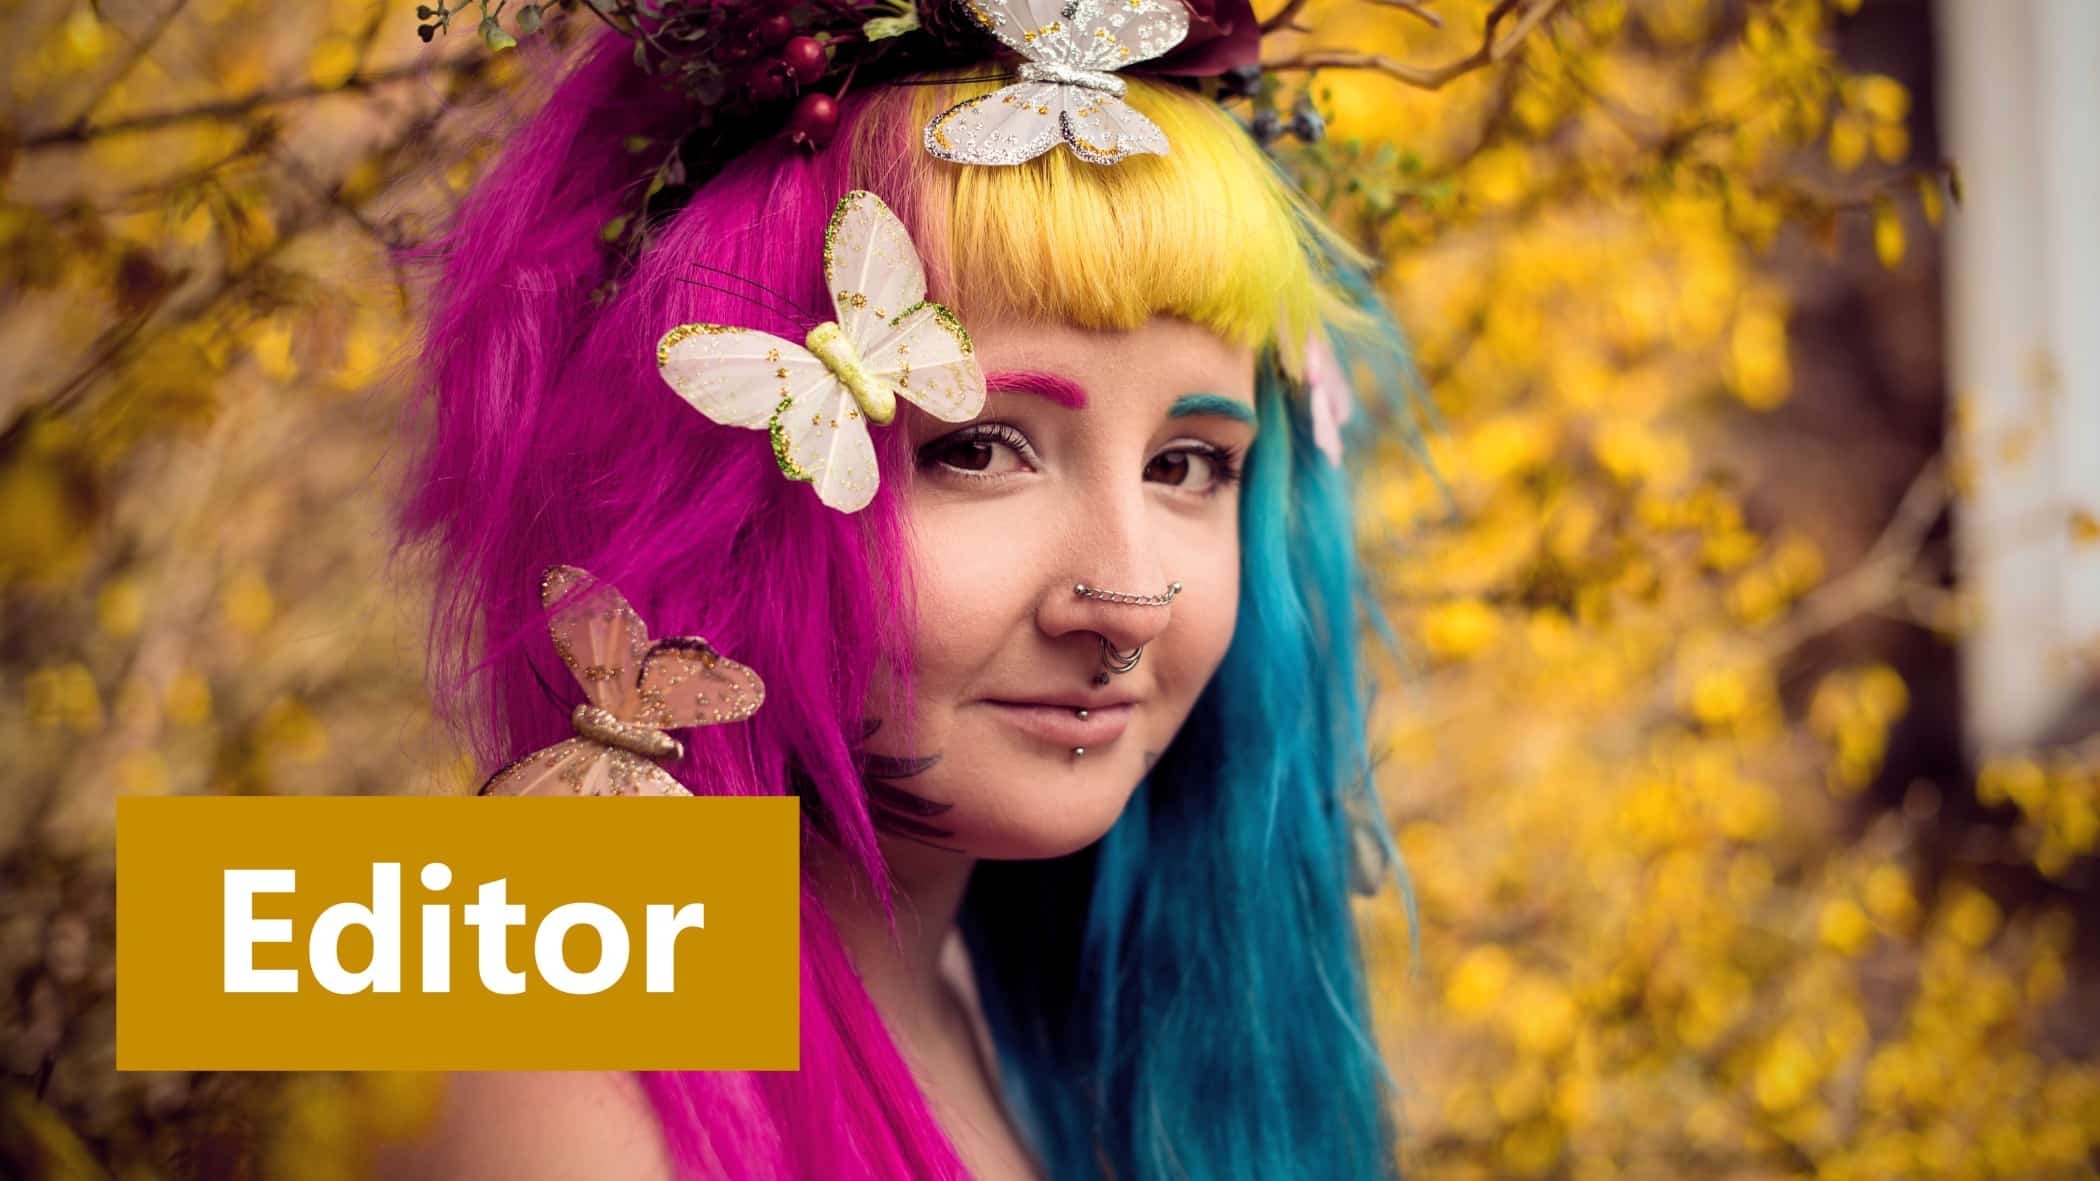 Editing Springtime Portraits II: Doing Advanced Retouching in the Editor